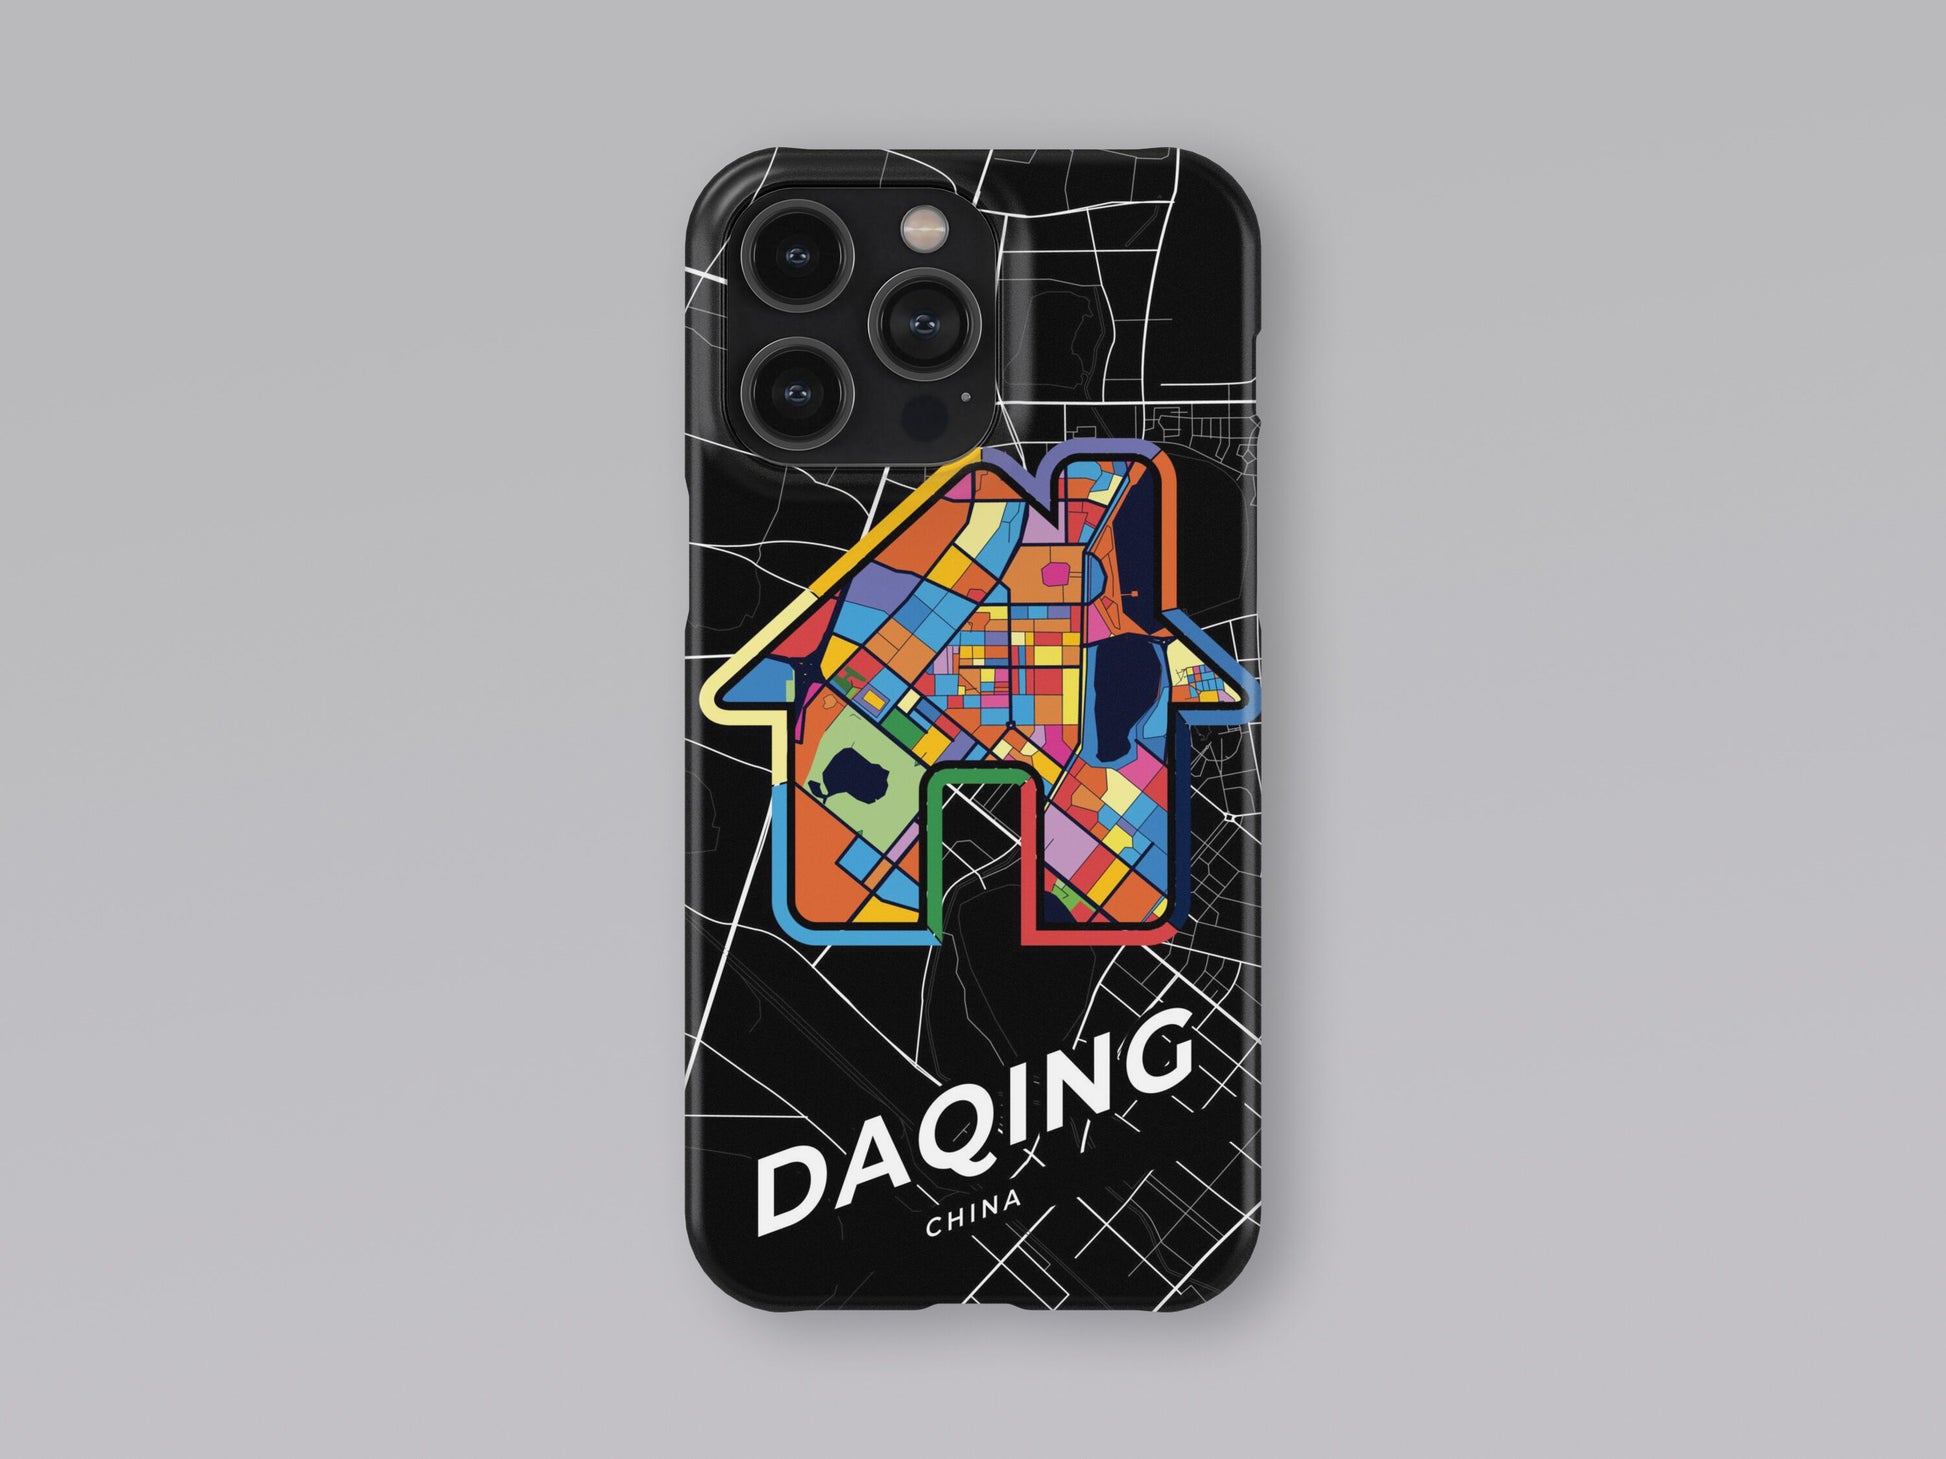 Daqing China slim phone case with colorful icon. Birthday, wedding or housewarming gift. Couple match cases. 3